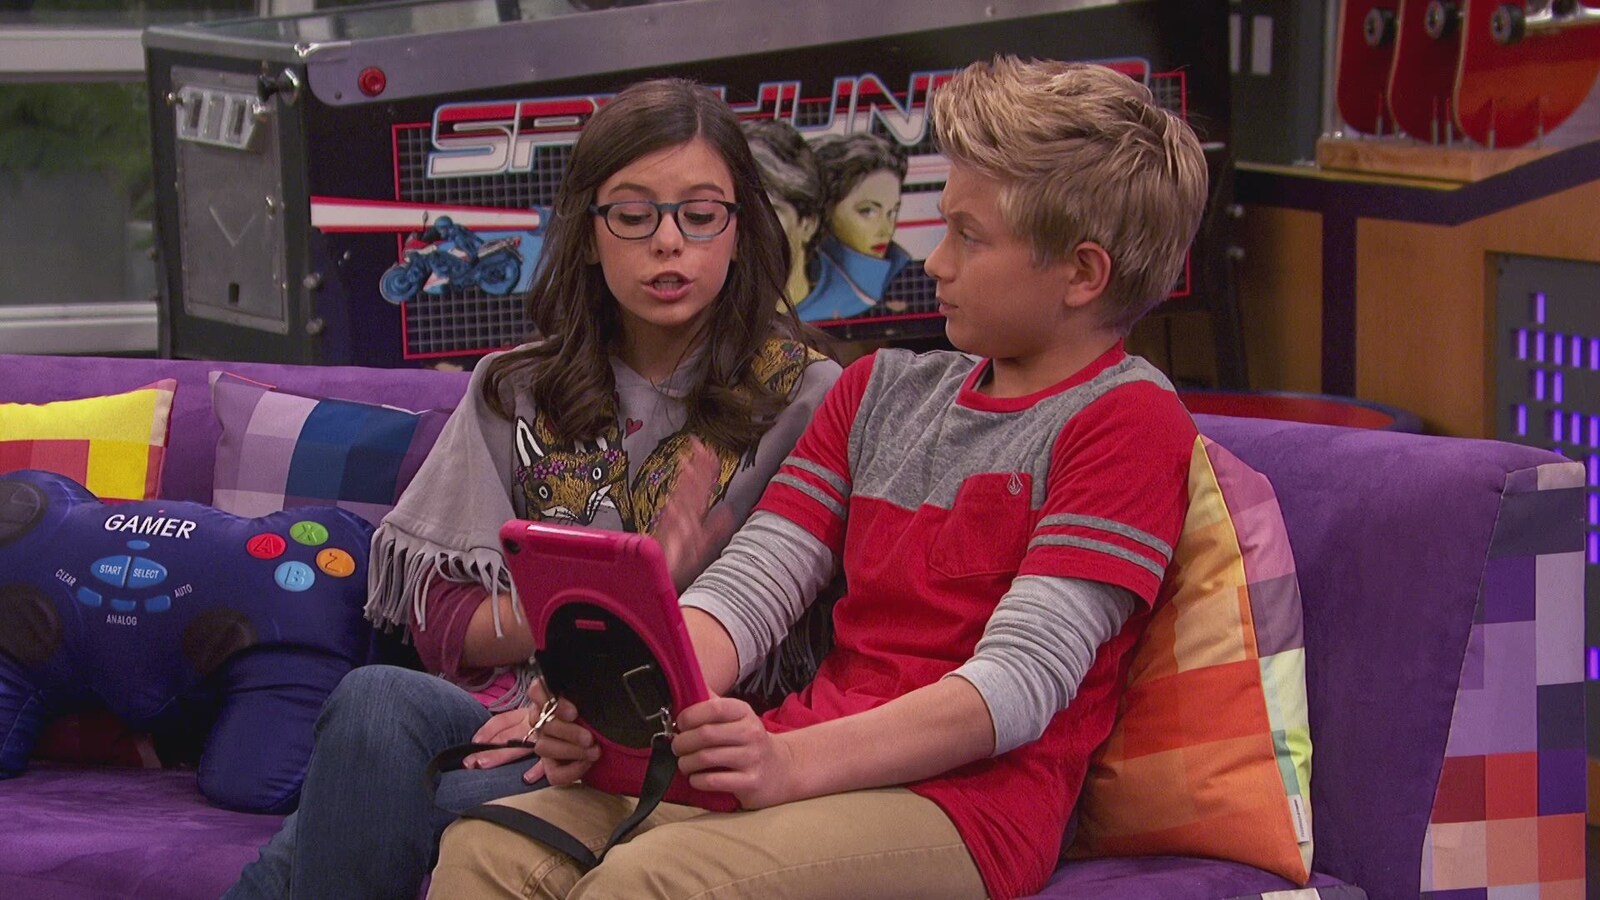 game-shakers/sesong-1/episode-19